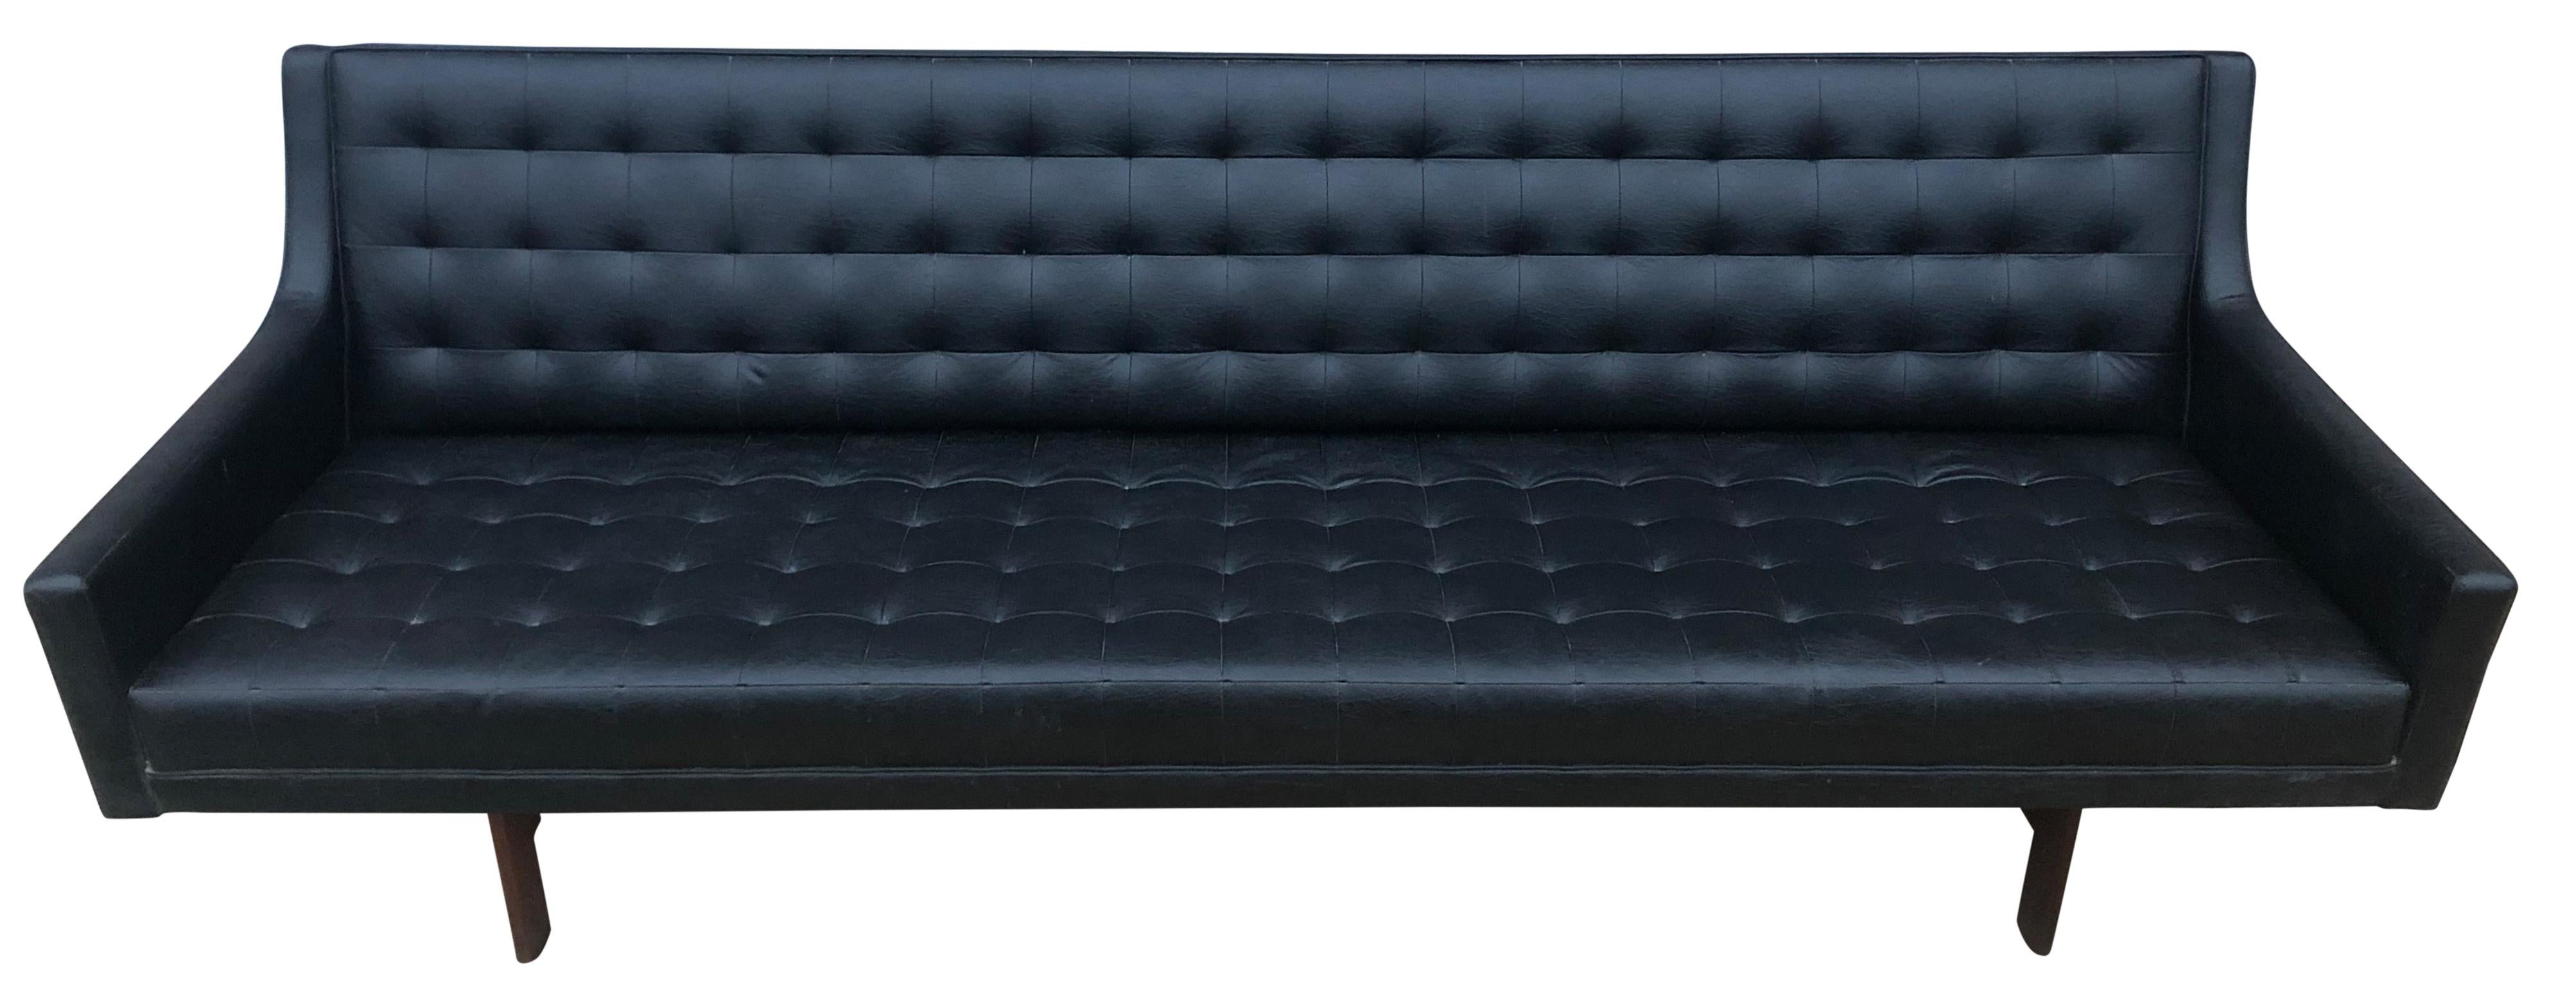 Beautiful unique Mid-Century Modern black faux leather vinyl tufted sofa with walnut wood base and leather by Patrician. Very soft ribbed black faux leather with texture on hardwood walnut frame and simple structure. Low seating 15